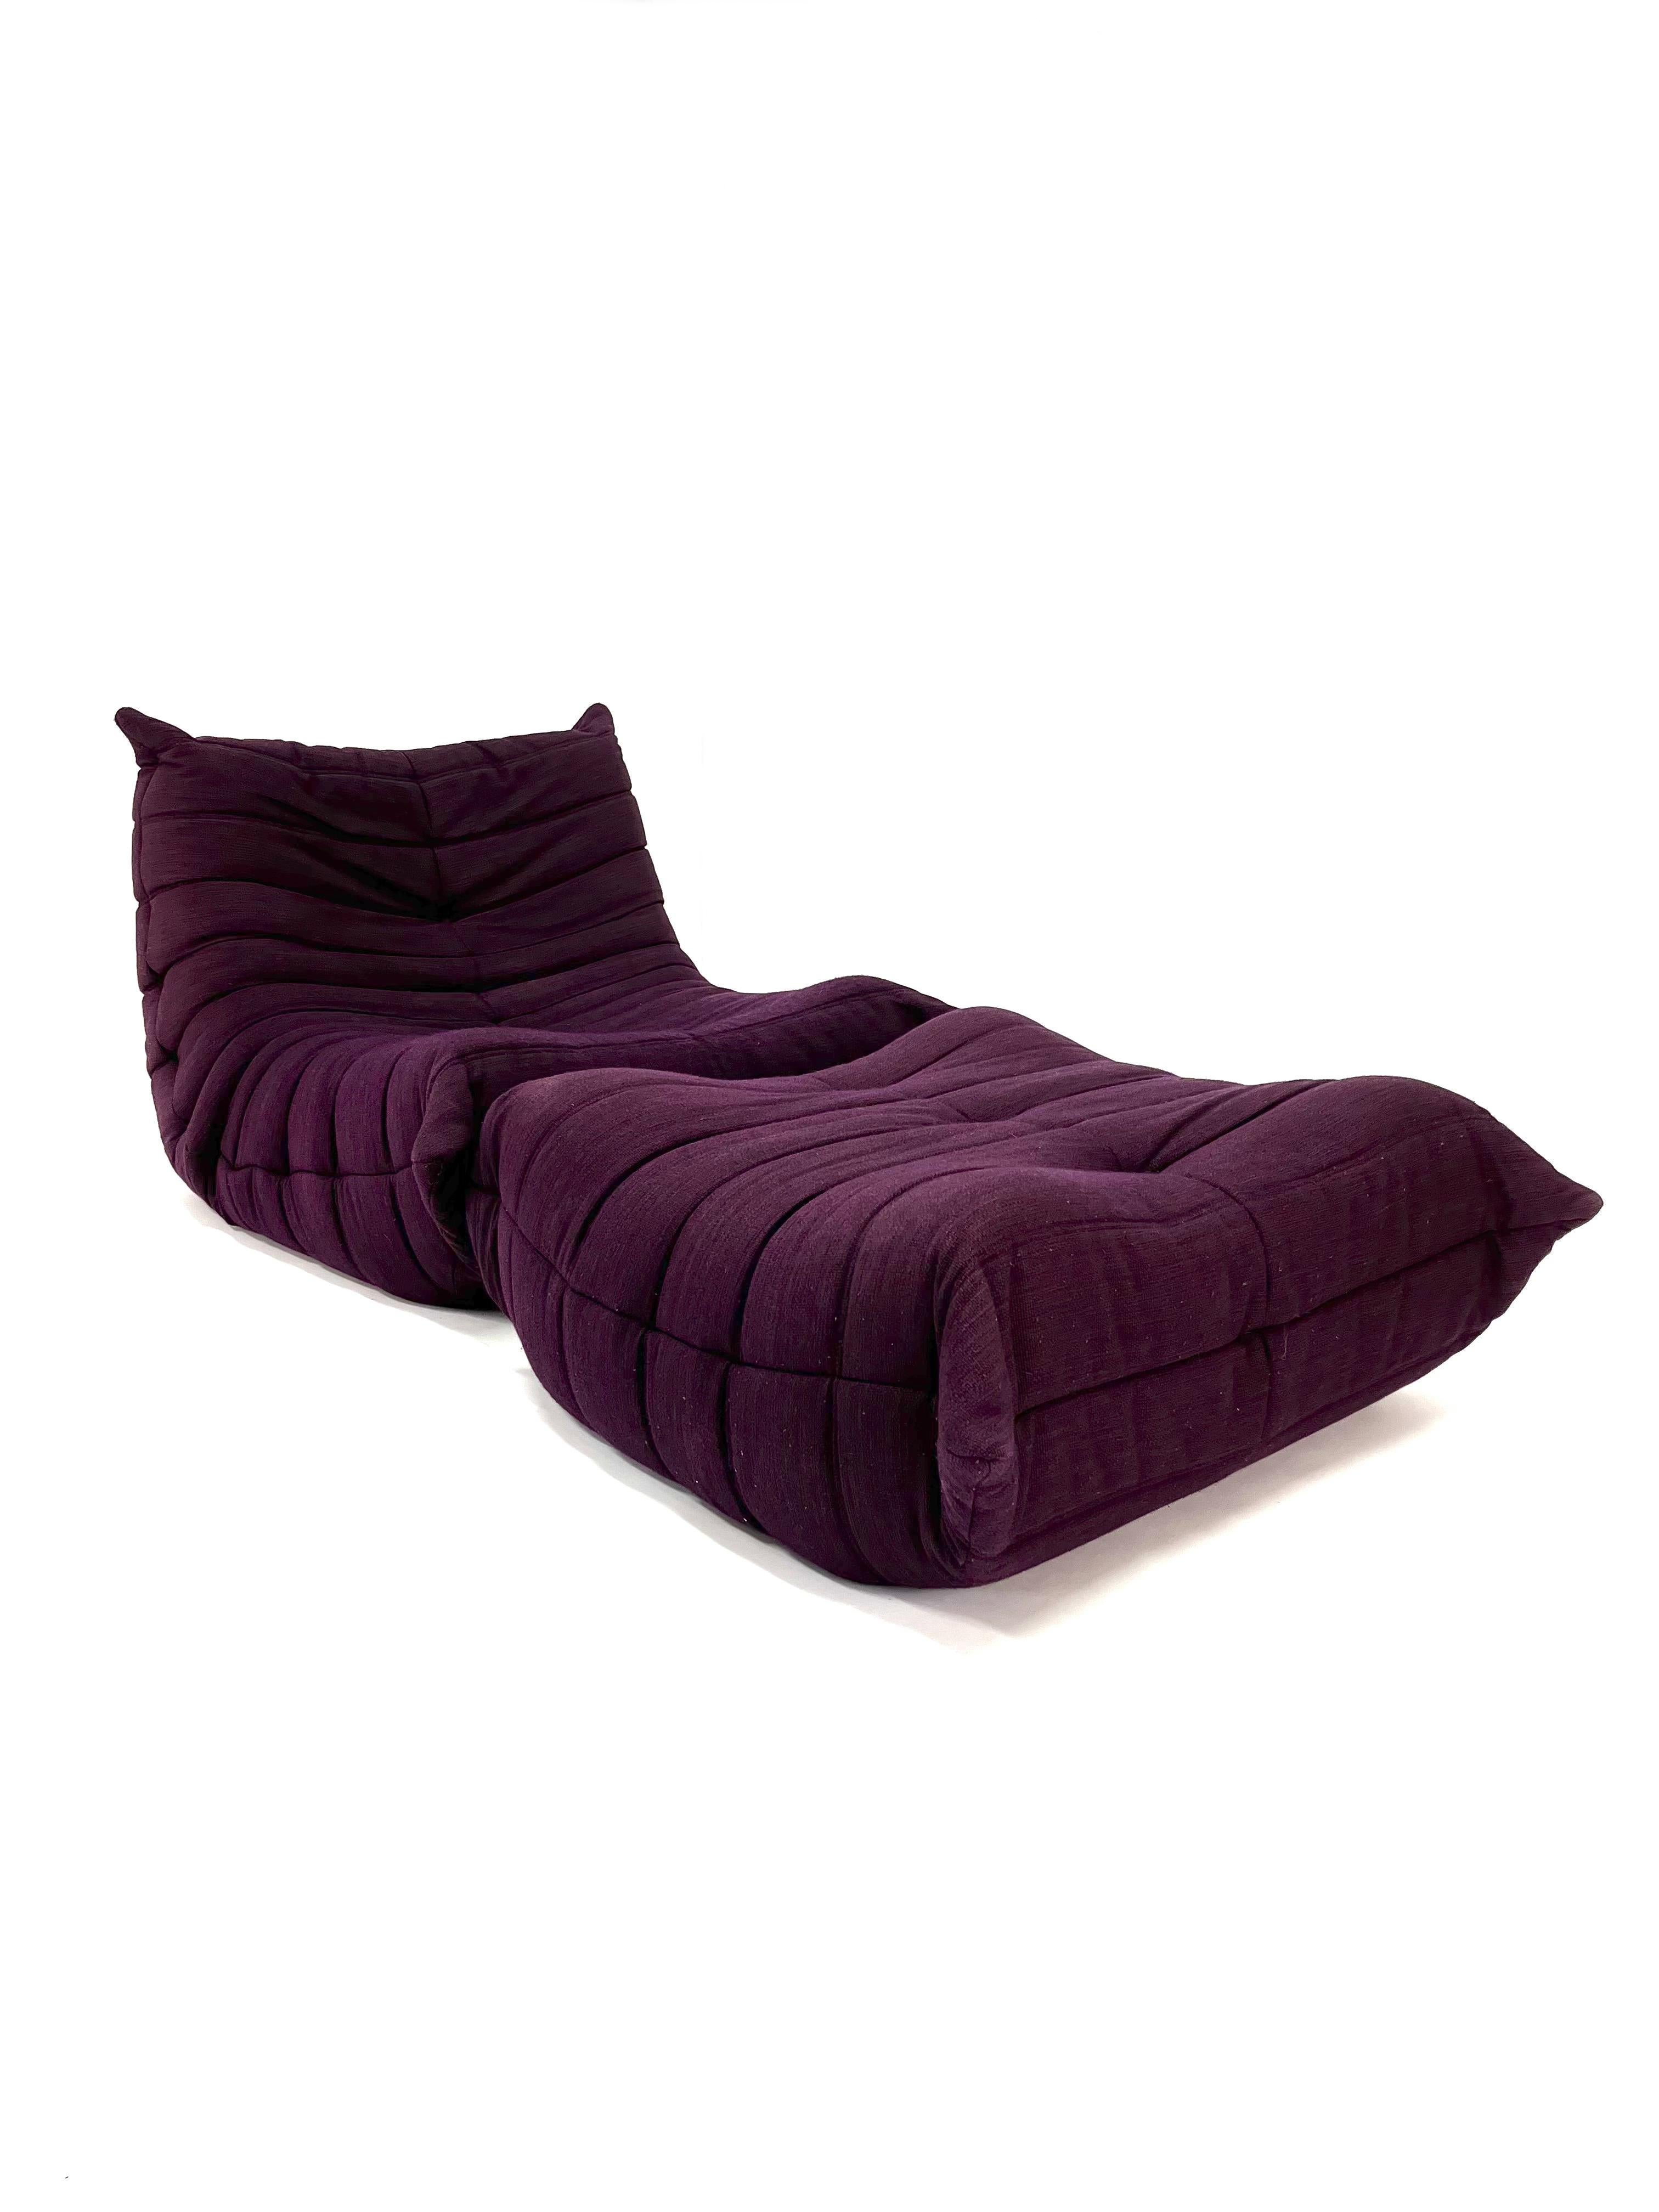 Togo Chair and Ottoman in Purple by Michel Ducaroy for Ligne Roset In Good Condition For Sale In San Diego, CA